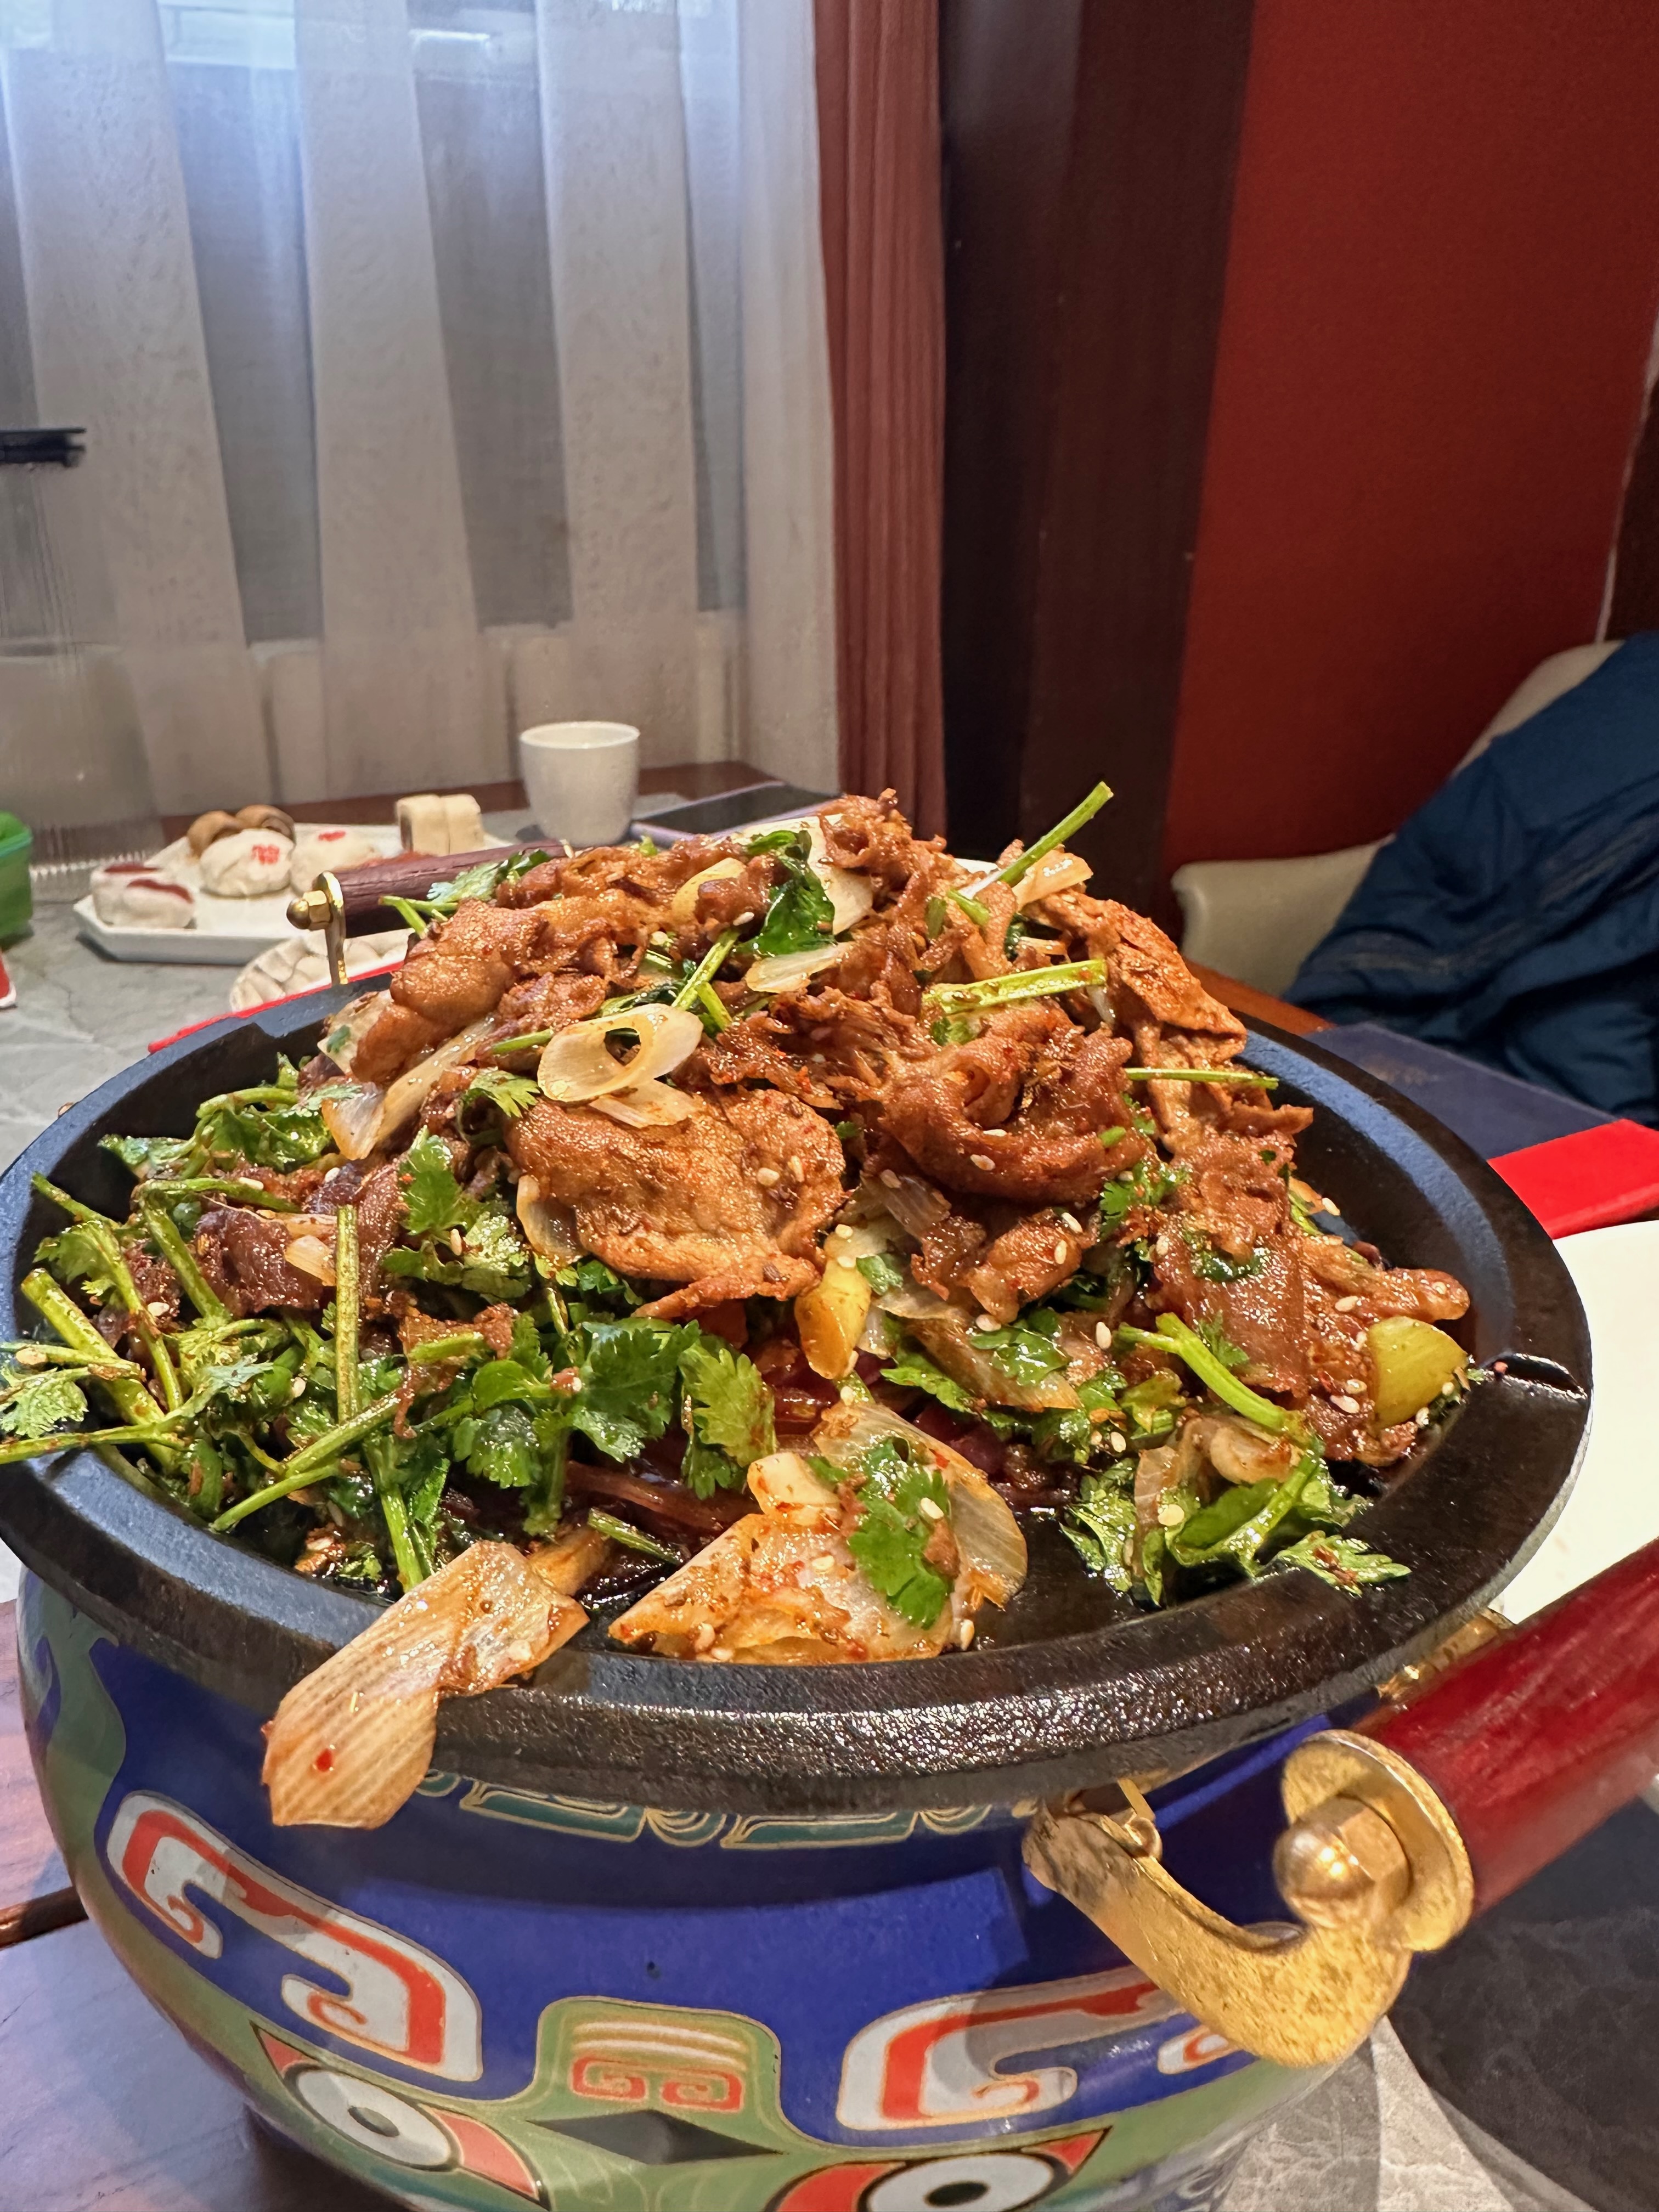 We loved the 炙子烤羊肉. Roast lamb with lots of cumin, red onion and corriander.